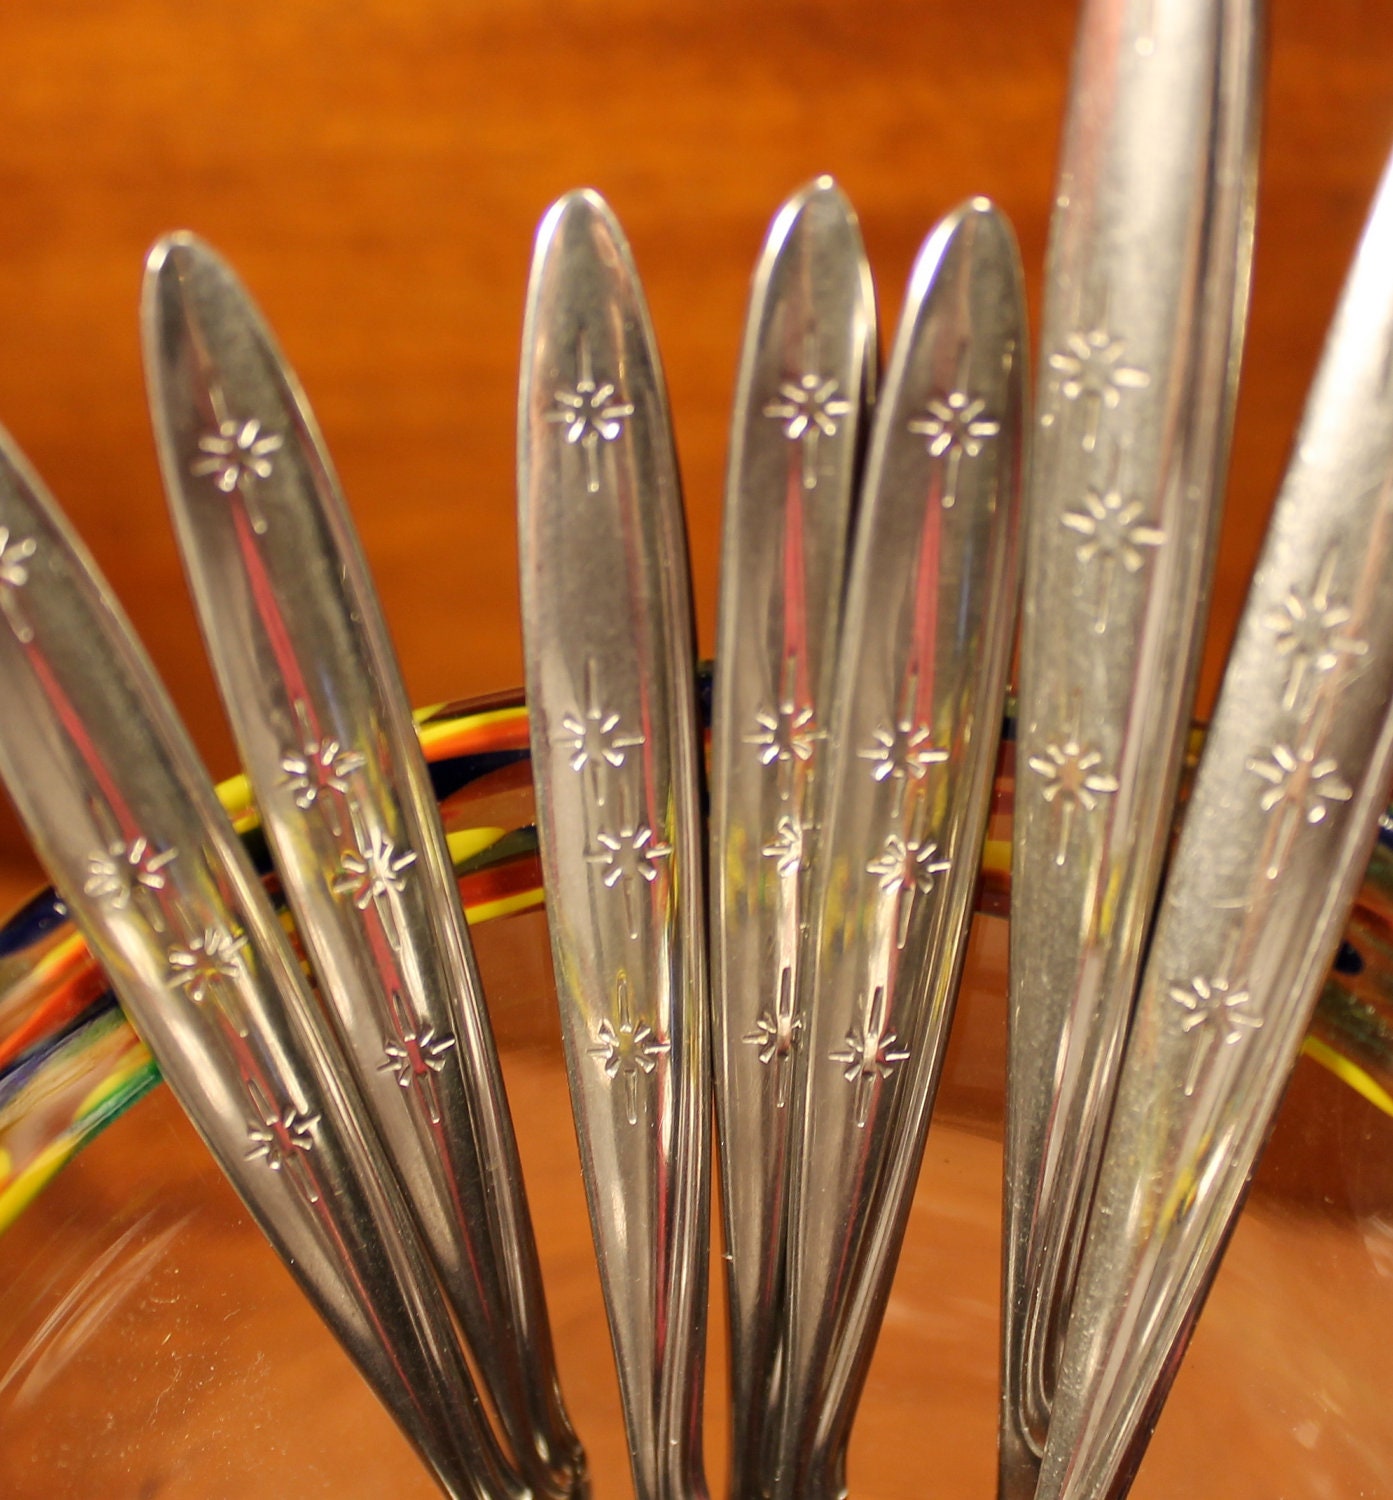 Vintage Flatware in Sunburst Pattern from Oneida by AtomicHoliday